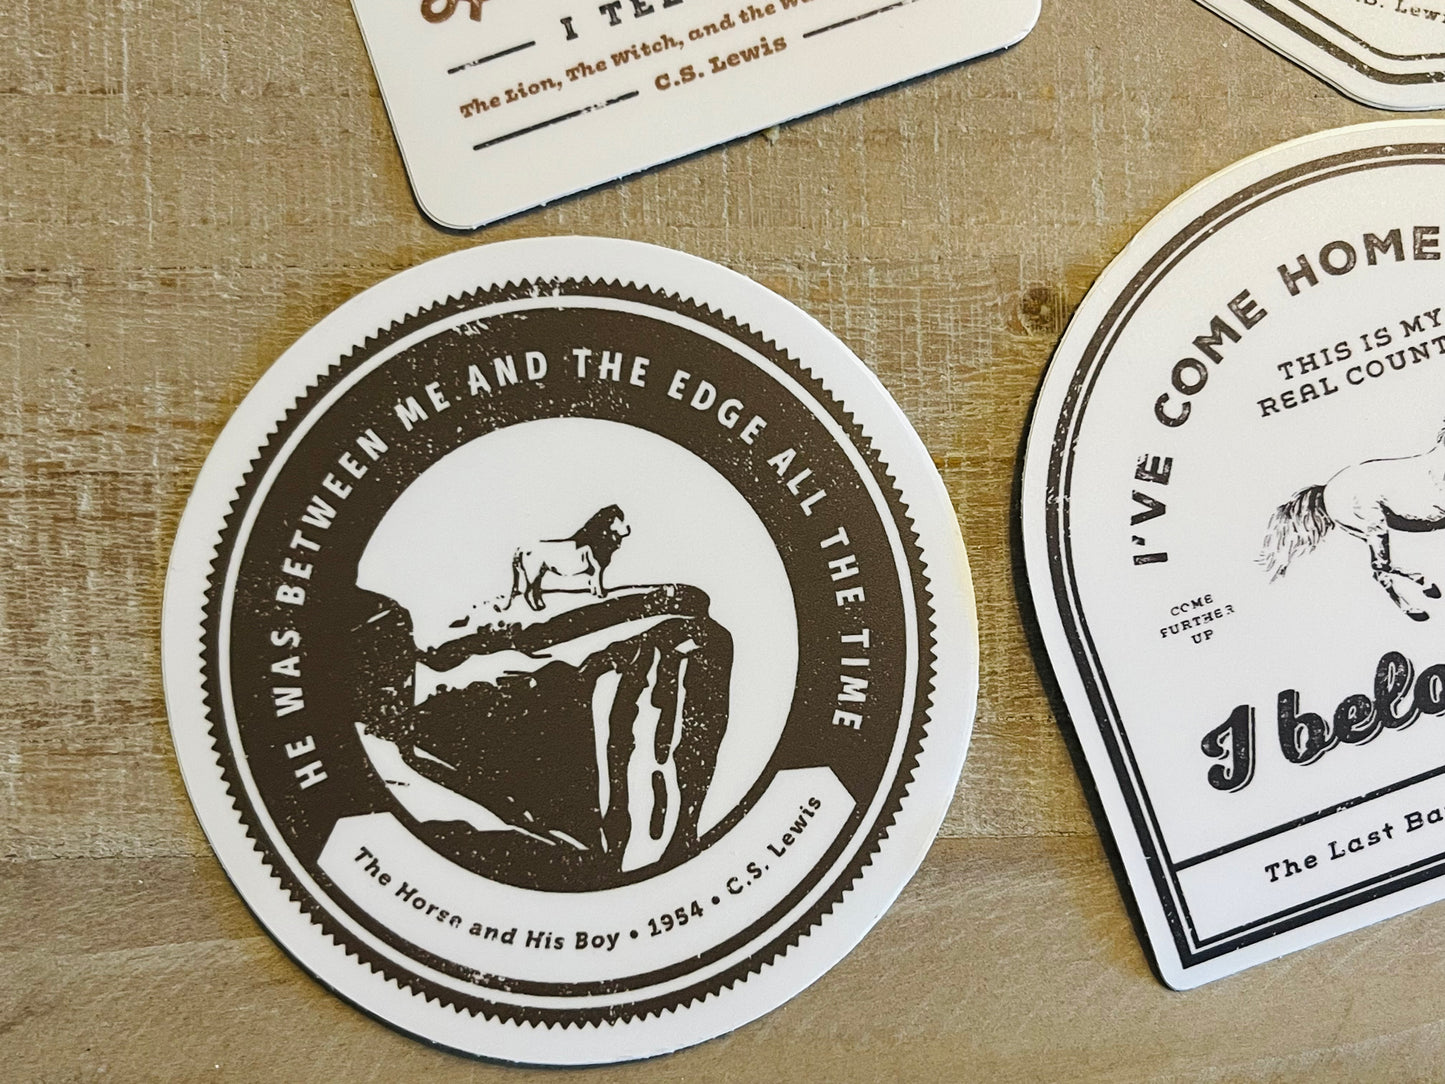 Between me and the edge sticker